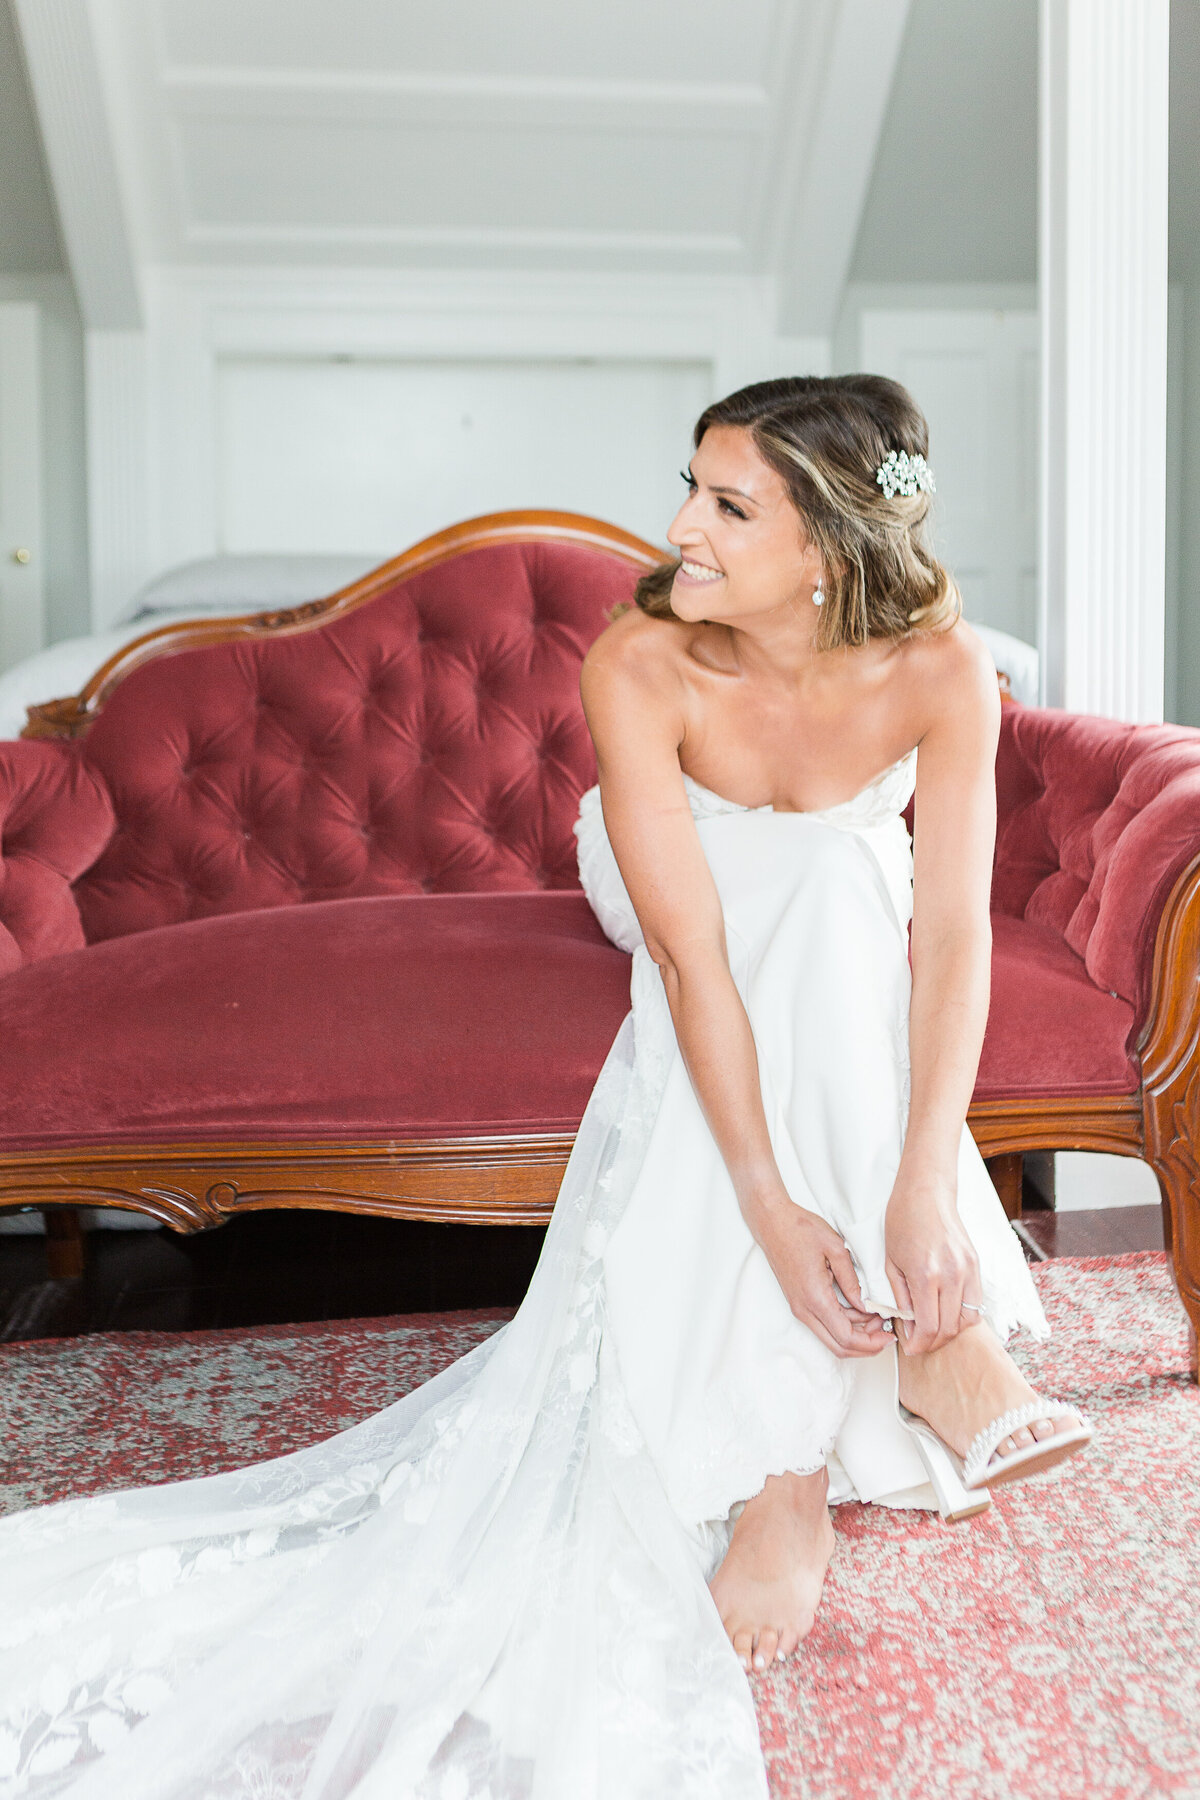 Bride puts on her shows as she is sitting on a burgundy vintage couch before her Five Bridge Inn wedding ceremony. Captured by best Massachusetts wedding photographer Lia Rose Weddings.